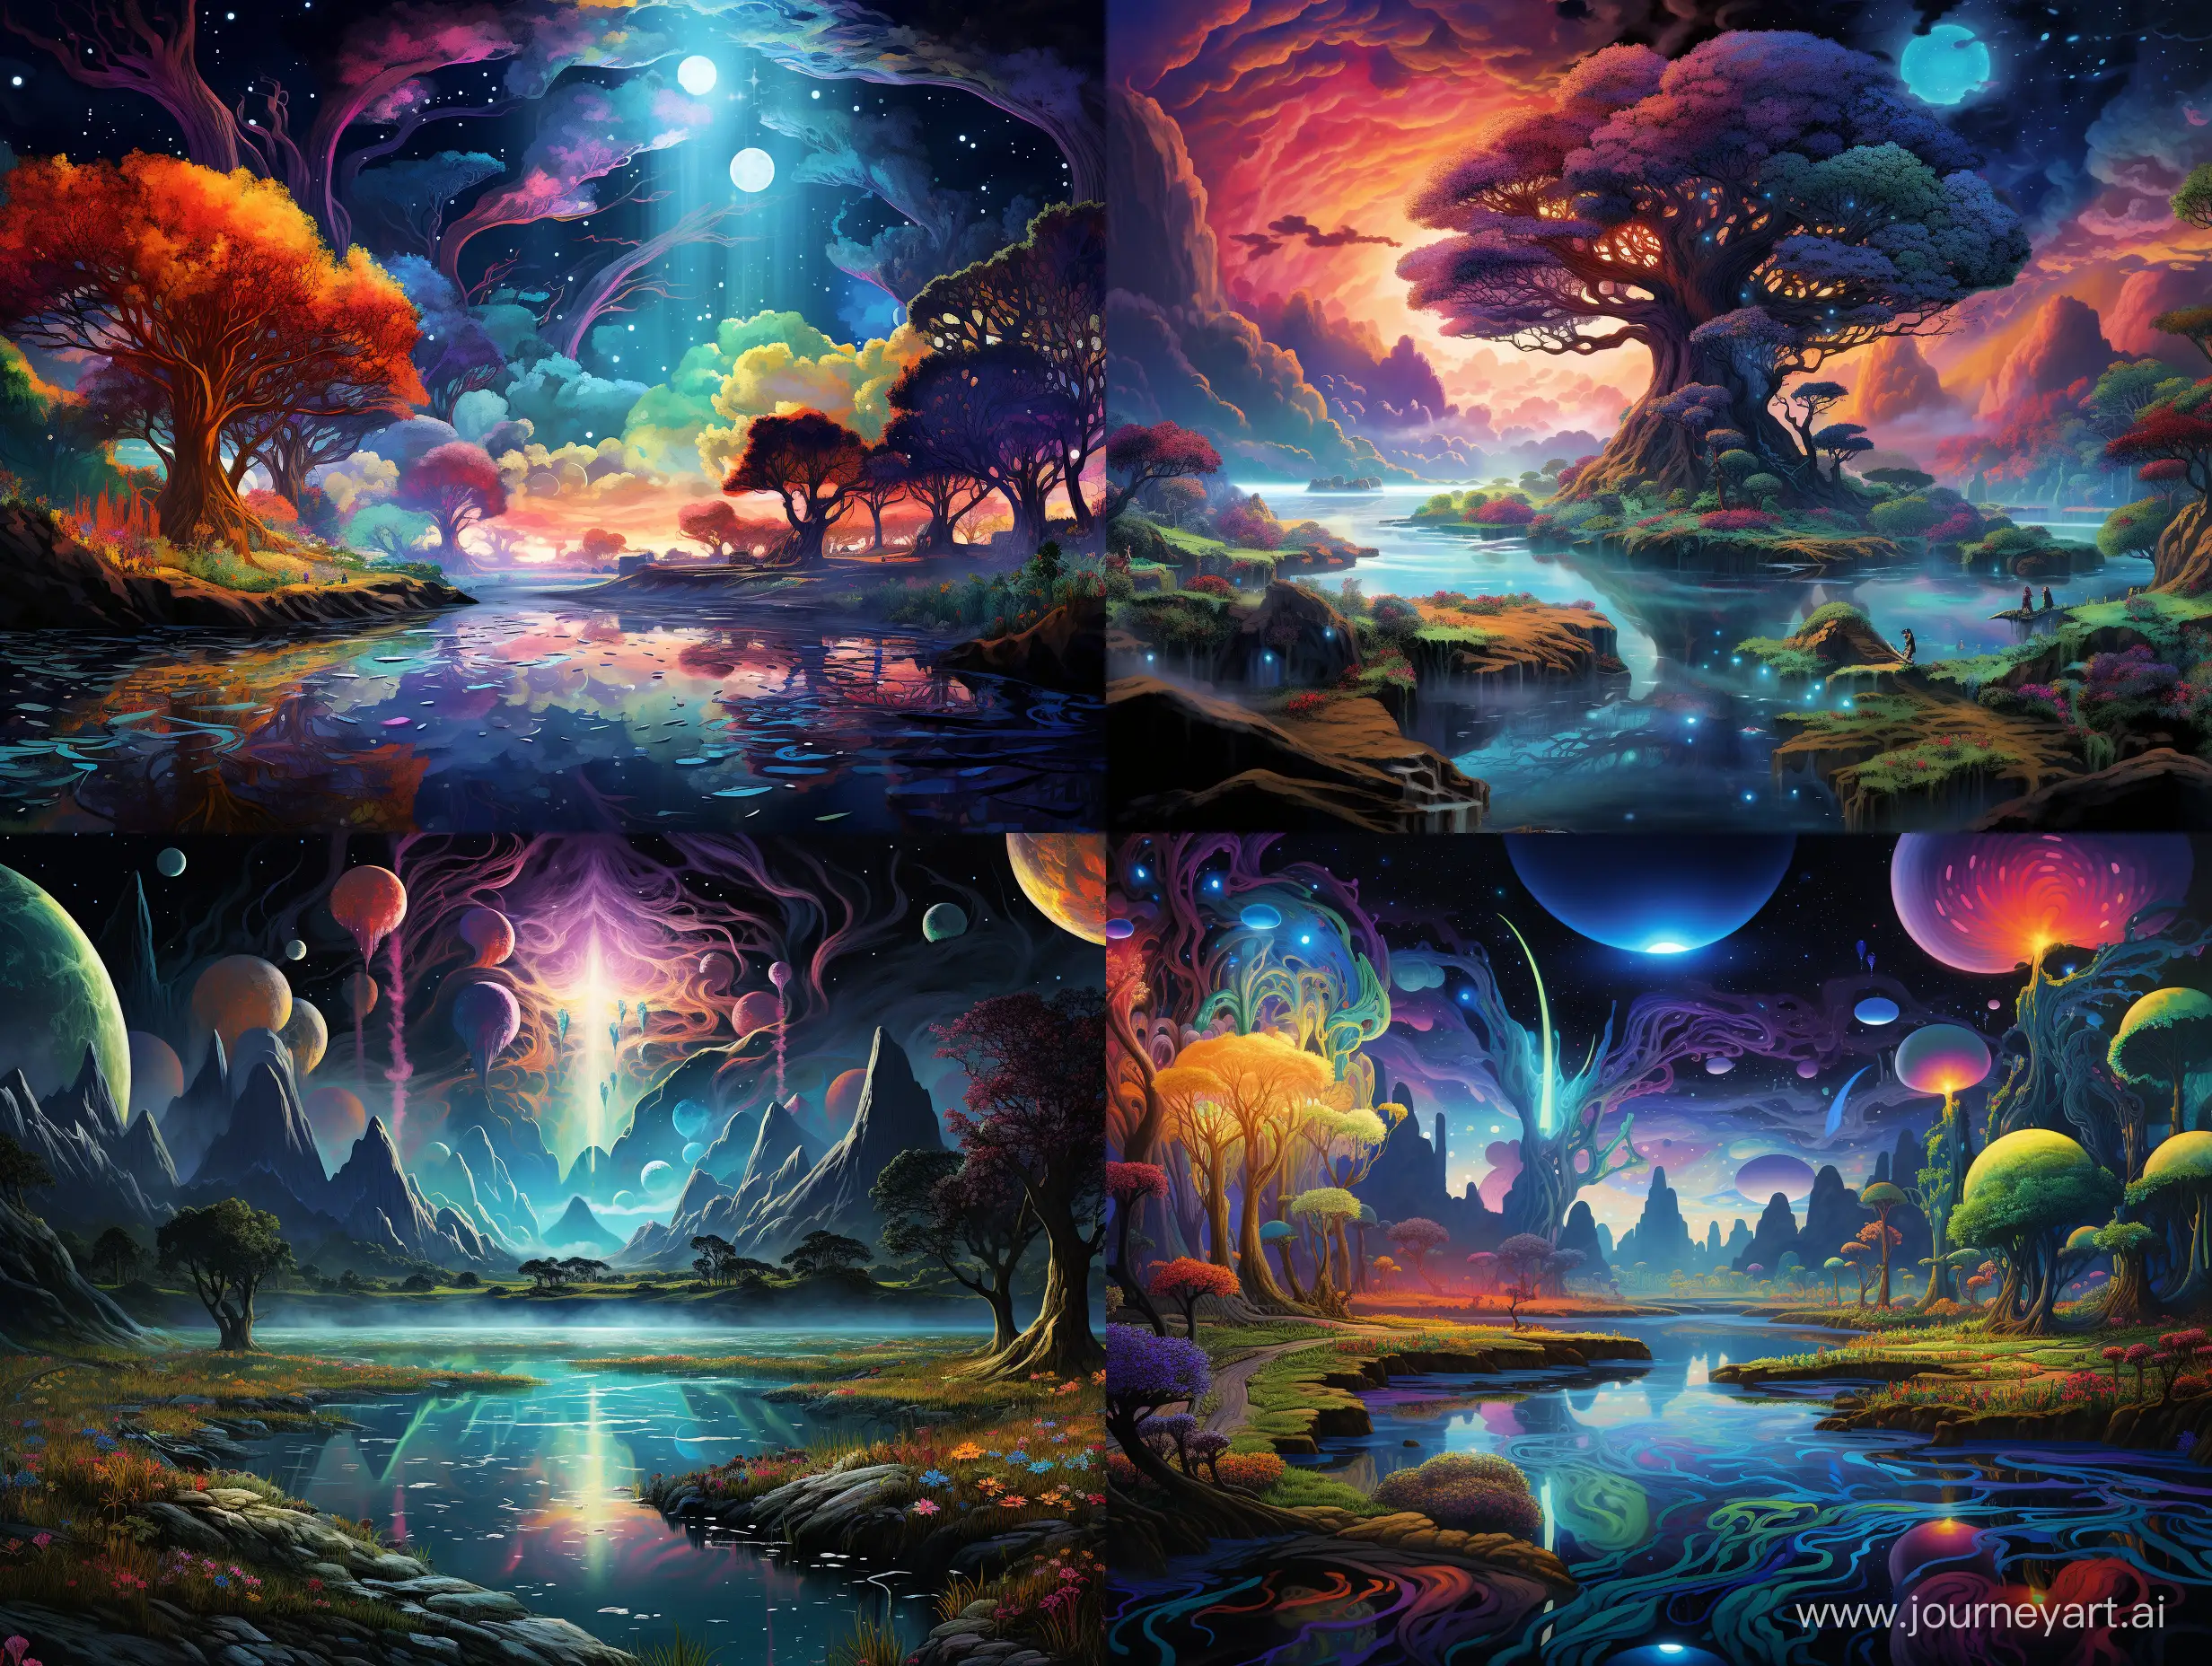 "Generate a vivid and surreal landscape featuring a combination of floating islands, bioluminescent flora, and a mesmerizing sky filled with swirling colors. The focal point should be a mythical creature seamlessly integrated into the scenery, evoking a sense of wonder and magic."